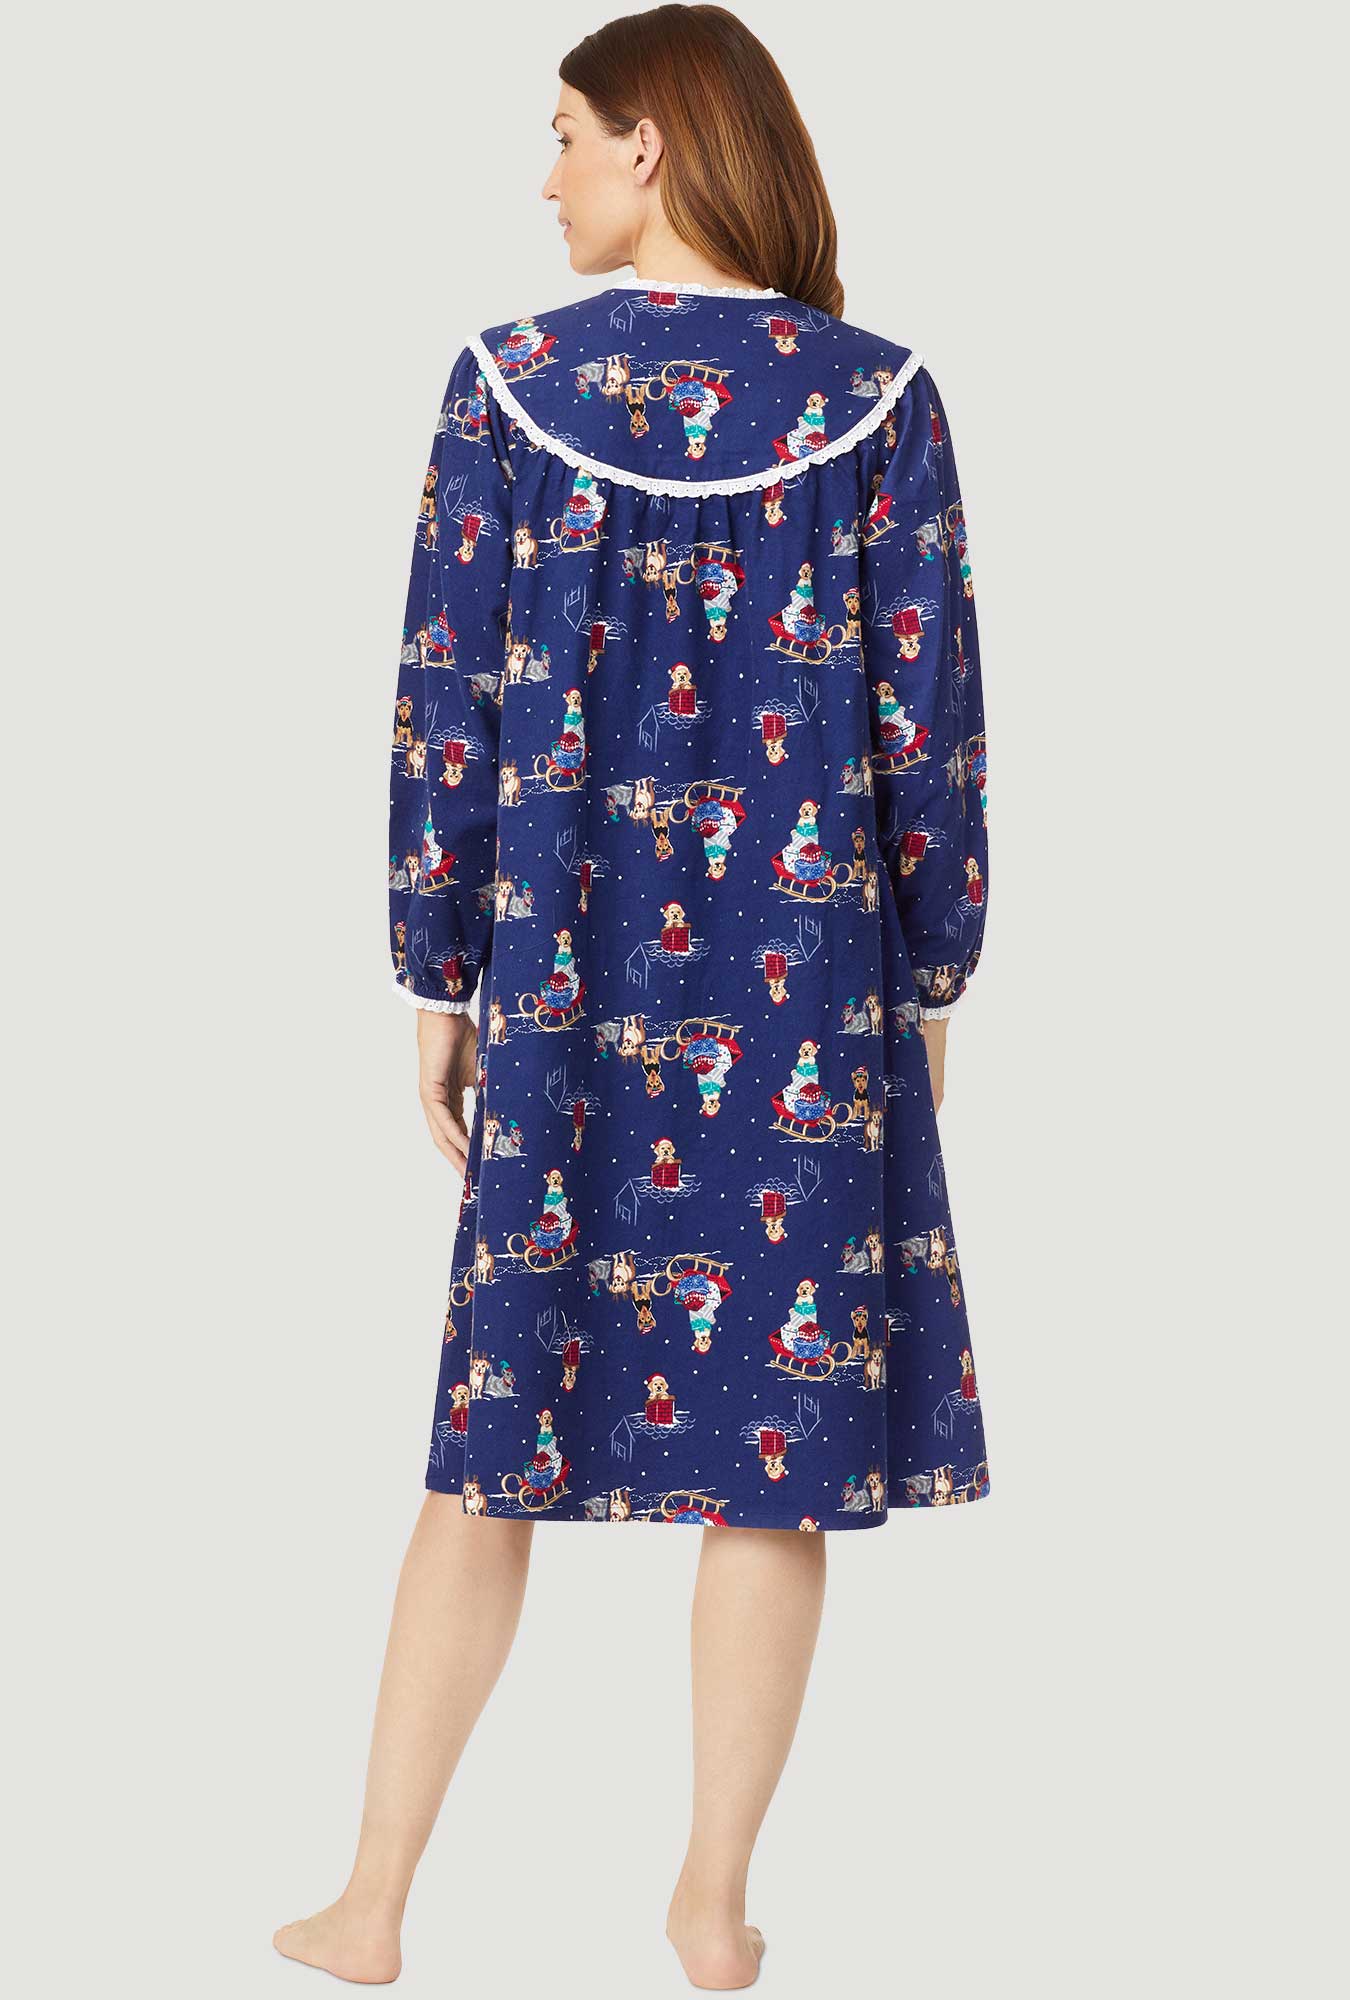 A lady wearing navy long sleeve waltz flannel down with sleigh puppies print.